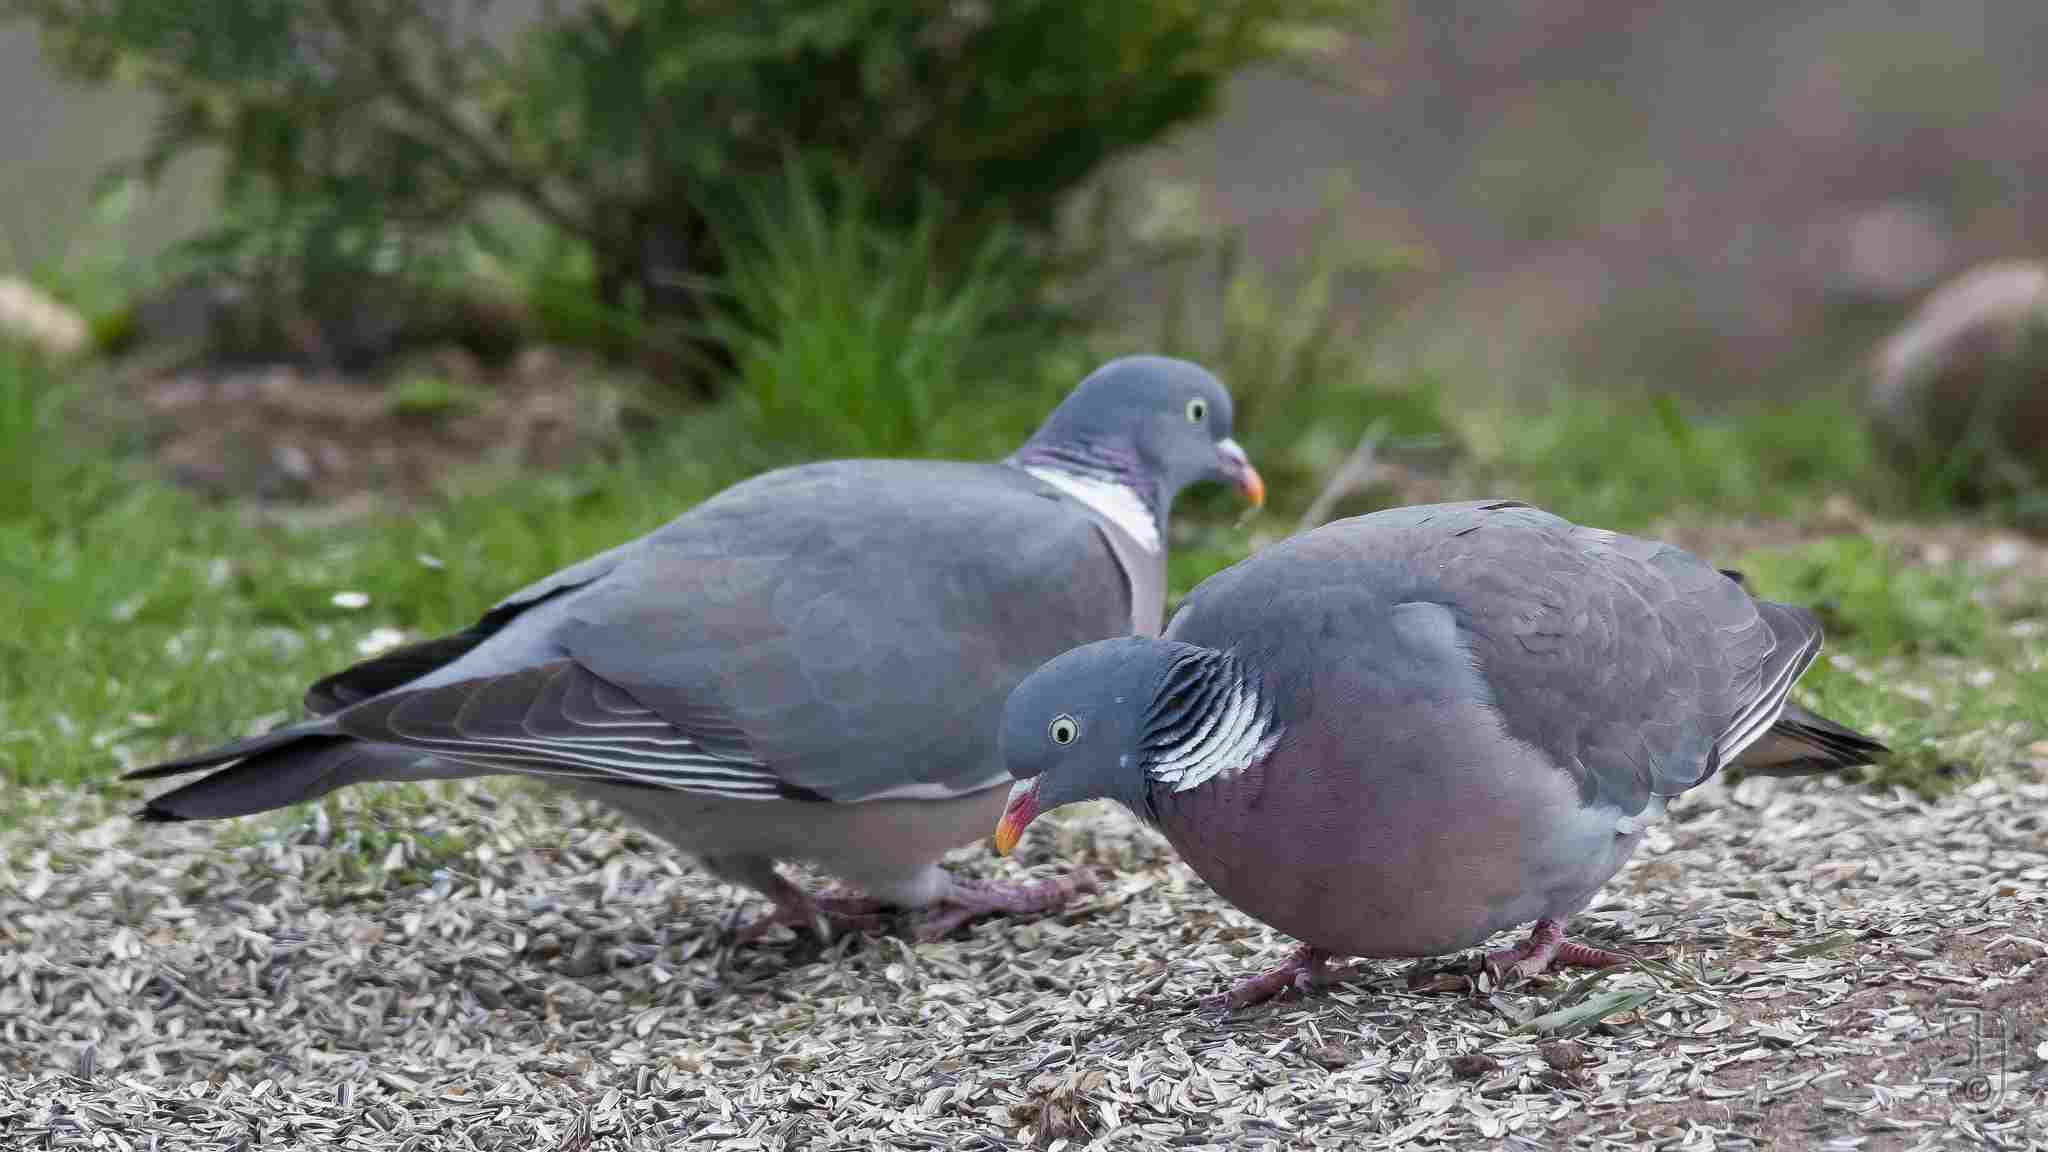 Is a Pigeon a Consumer: What Pigeons Eat Includes Grains, Seeds, Vegetables, Berries, and Insects (Credit: Stein Arne Jensen 2012)